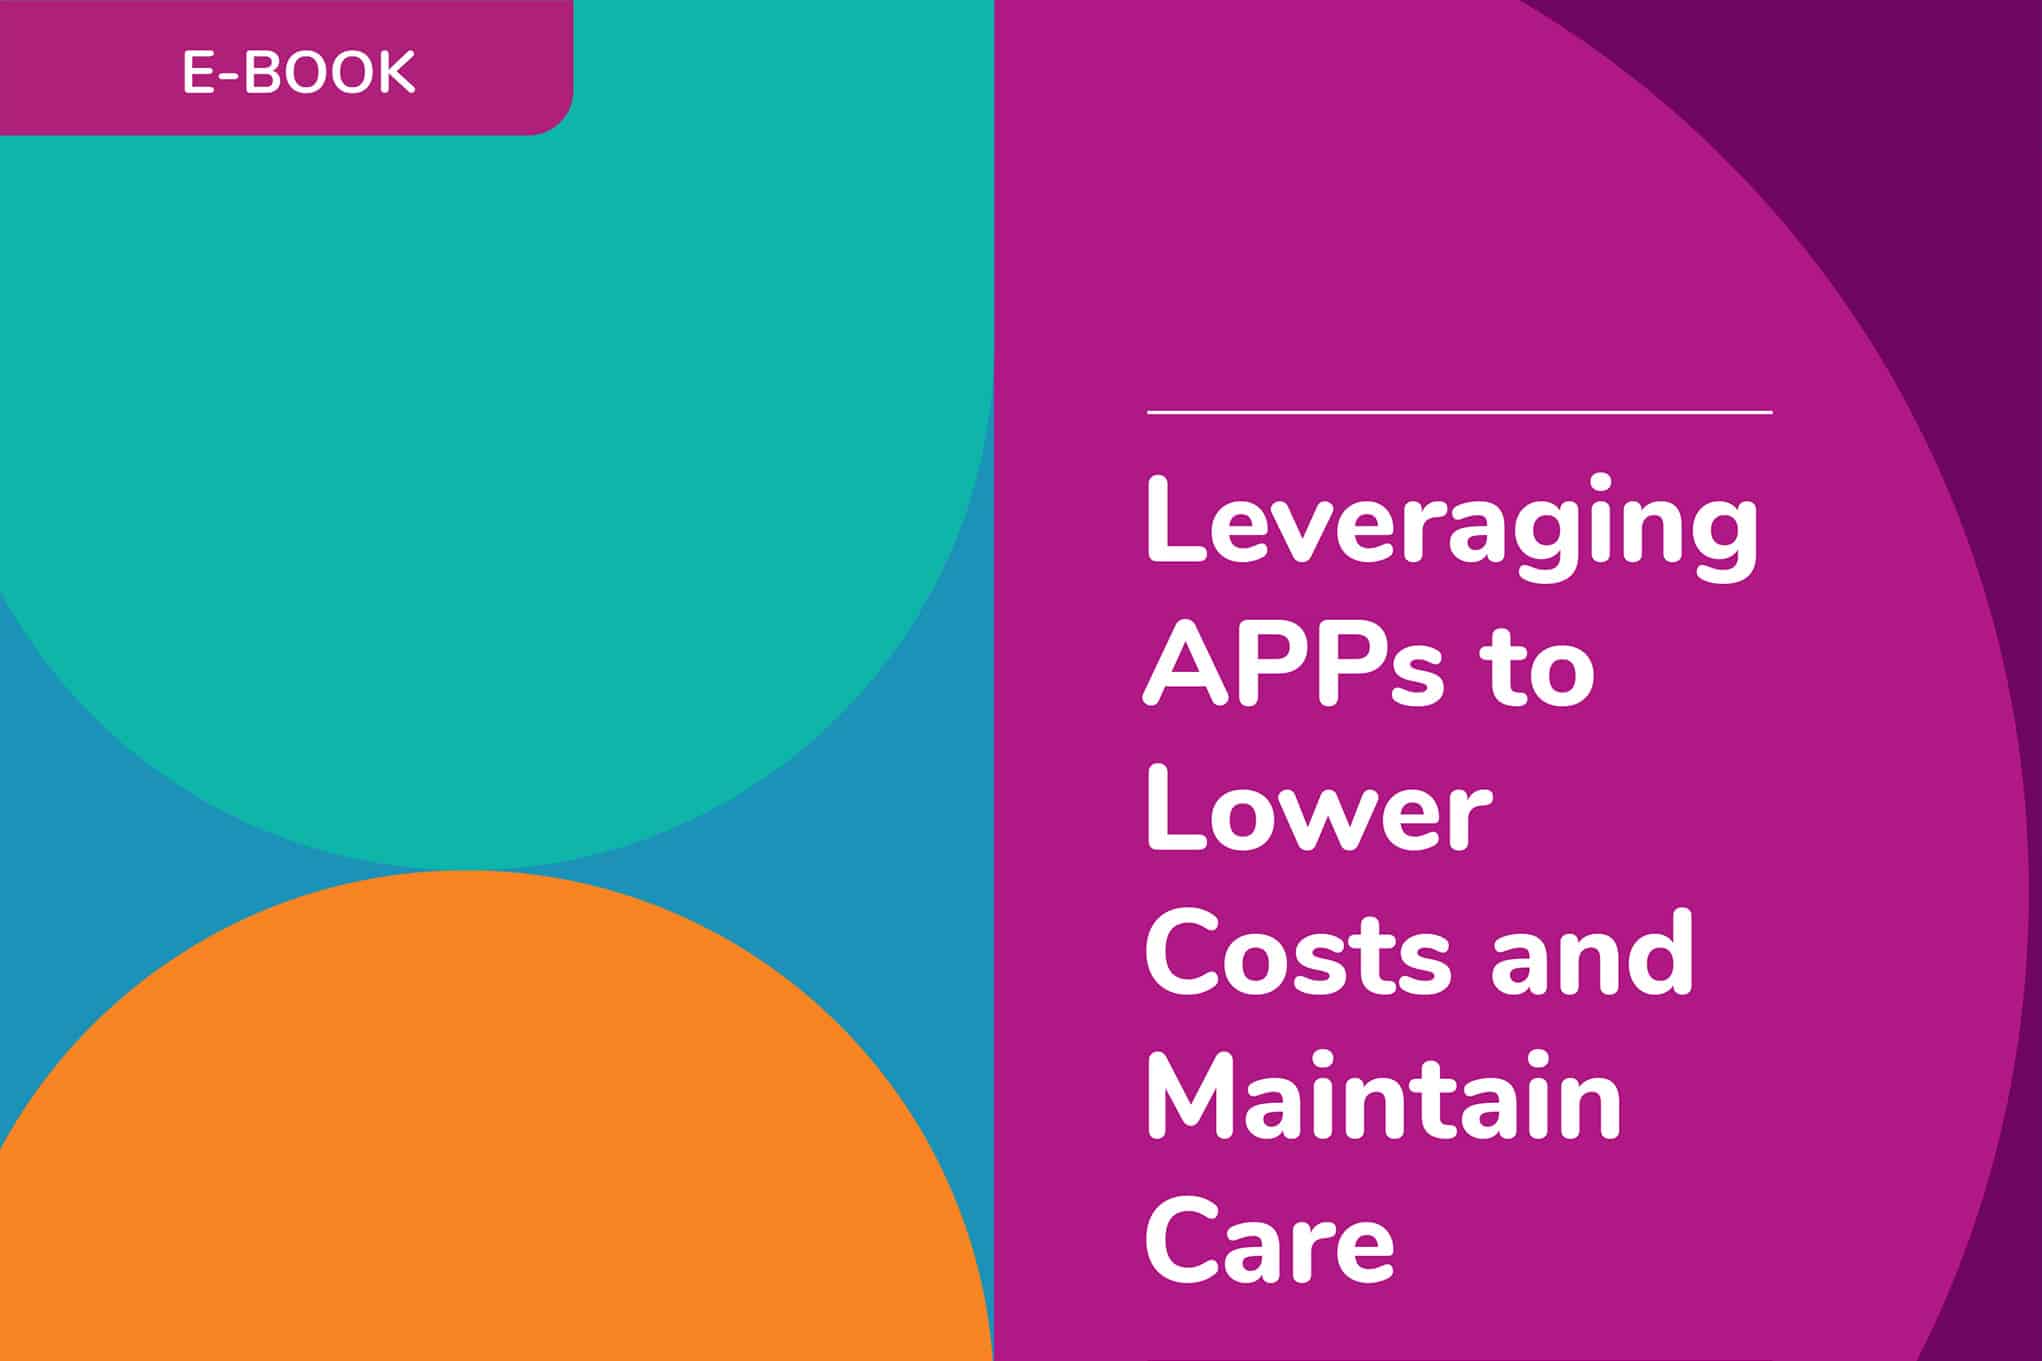 Leveraging APPs to Lower Costs and Maintain Care